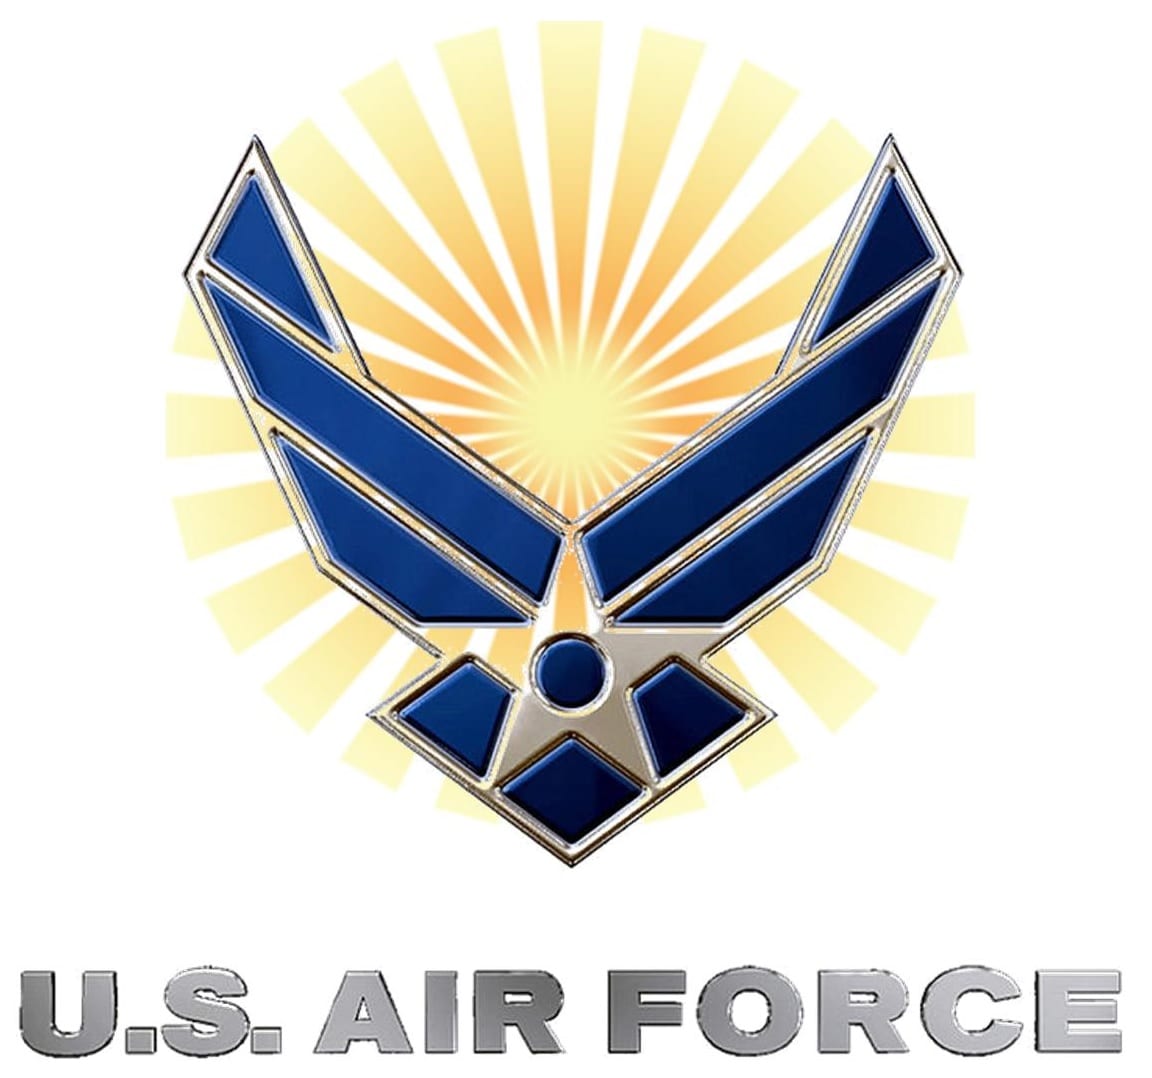 Air Force continues adoption of solar energy